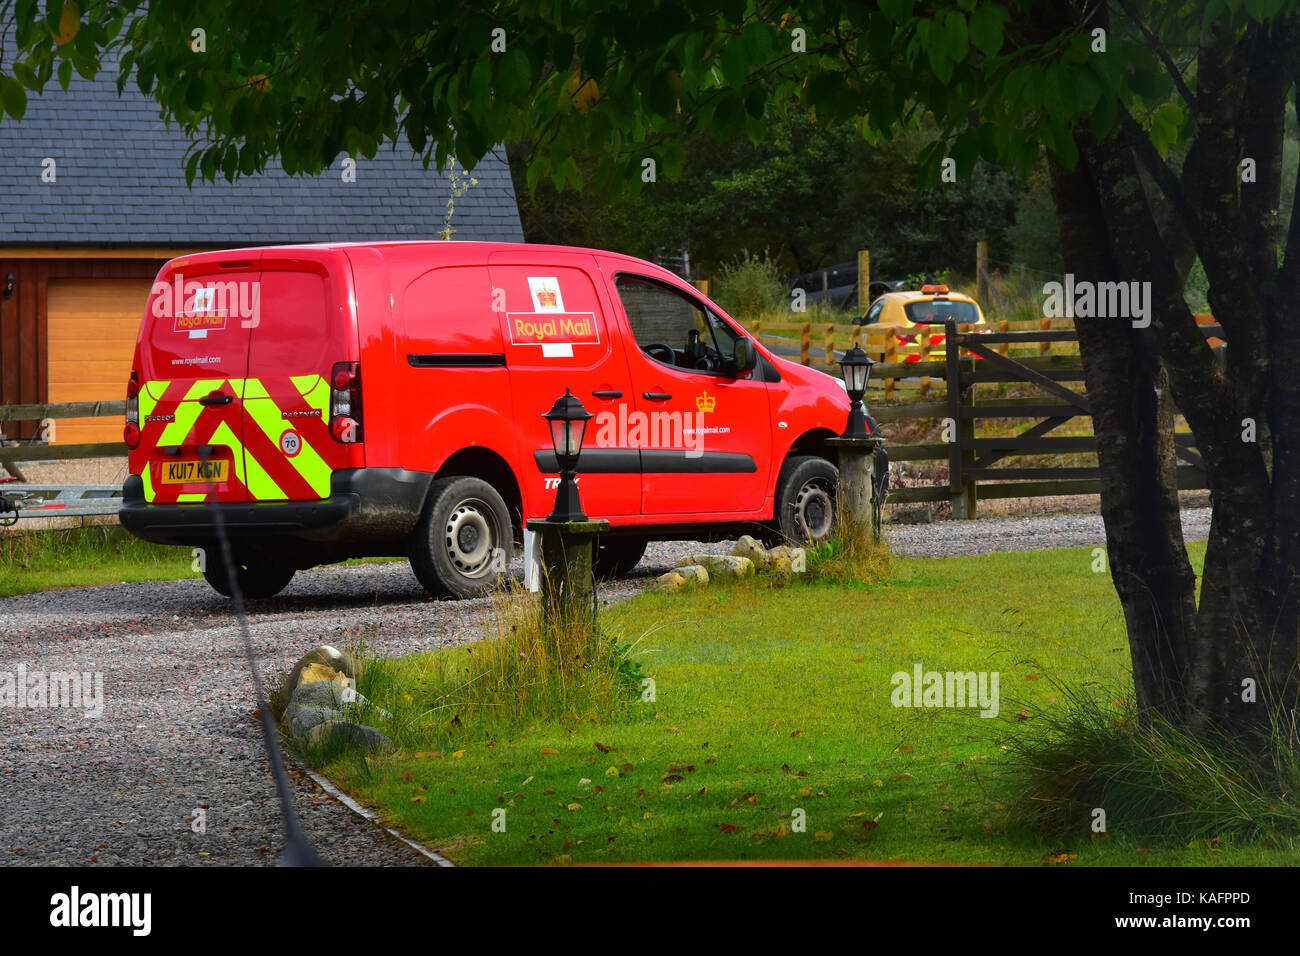 Royal Mail delivery post van in a rural setting Stock Photo Alamy